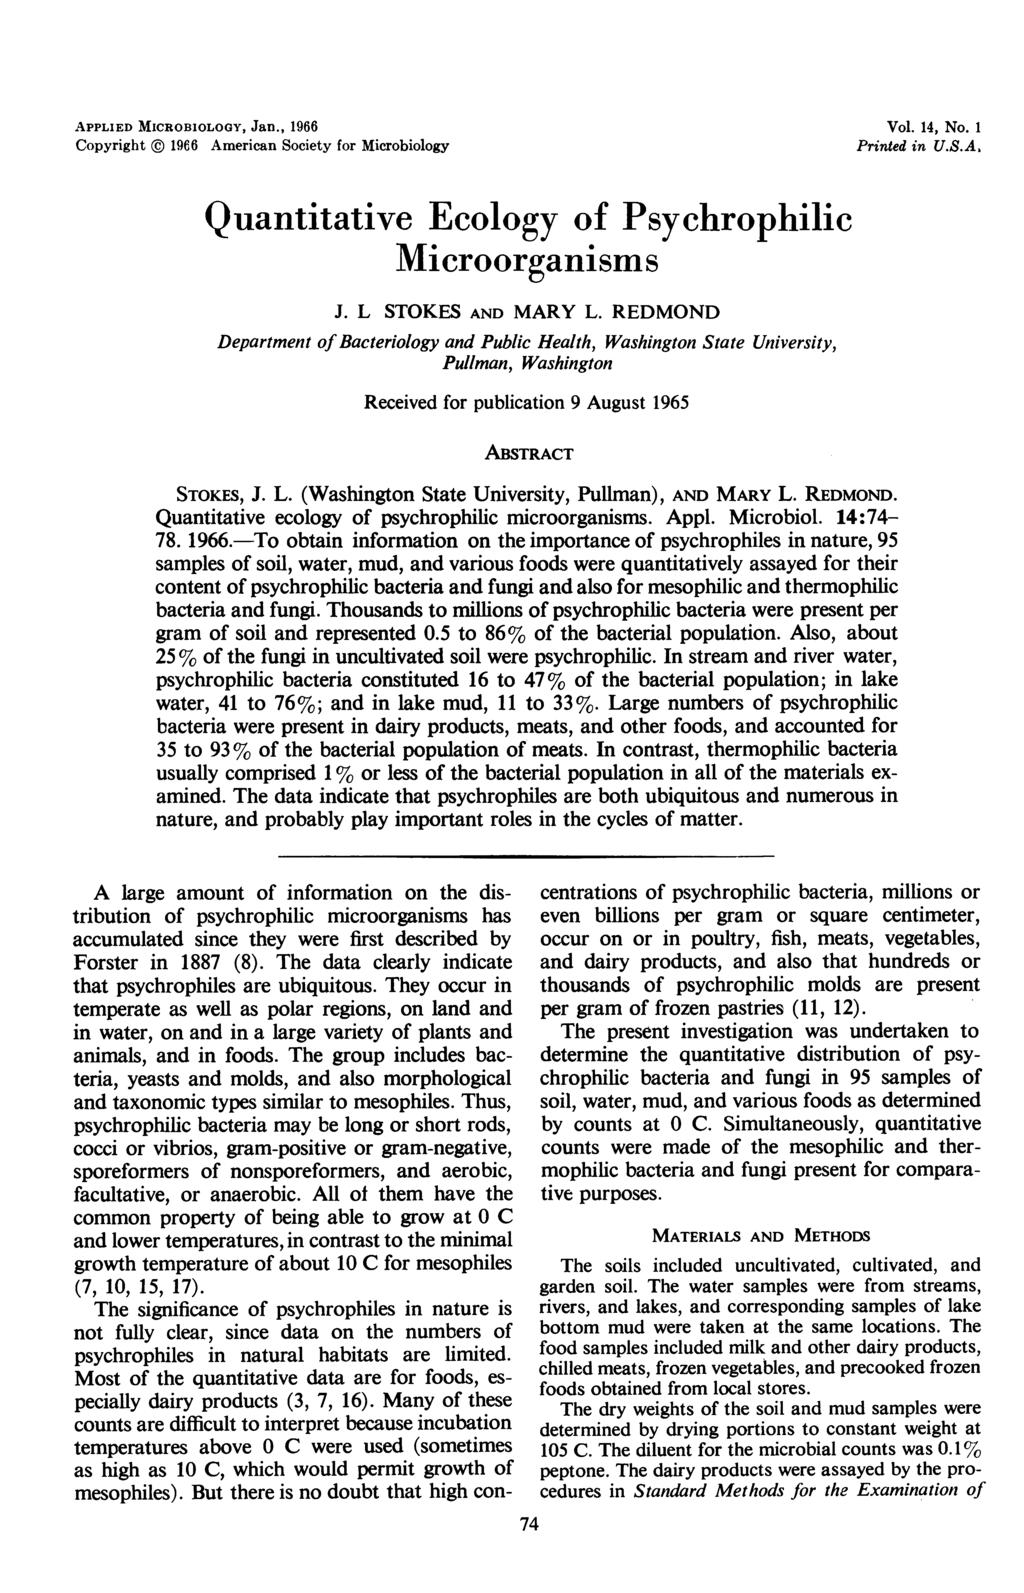 APPLIED MICROBIOLOGY, Jan., 1966 Vol. 14, No. 1 Copyright 1966 American Society for Microbiology Printed in U.S.A. Quantitative Ecology of Psychrophilic Microorganisms J. L STOKES AND MARY L.